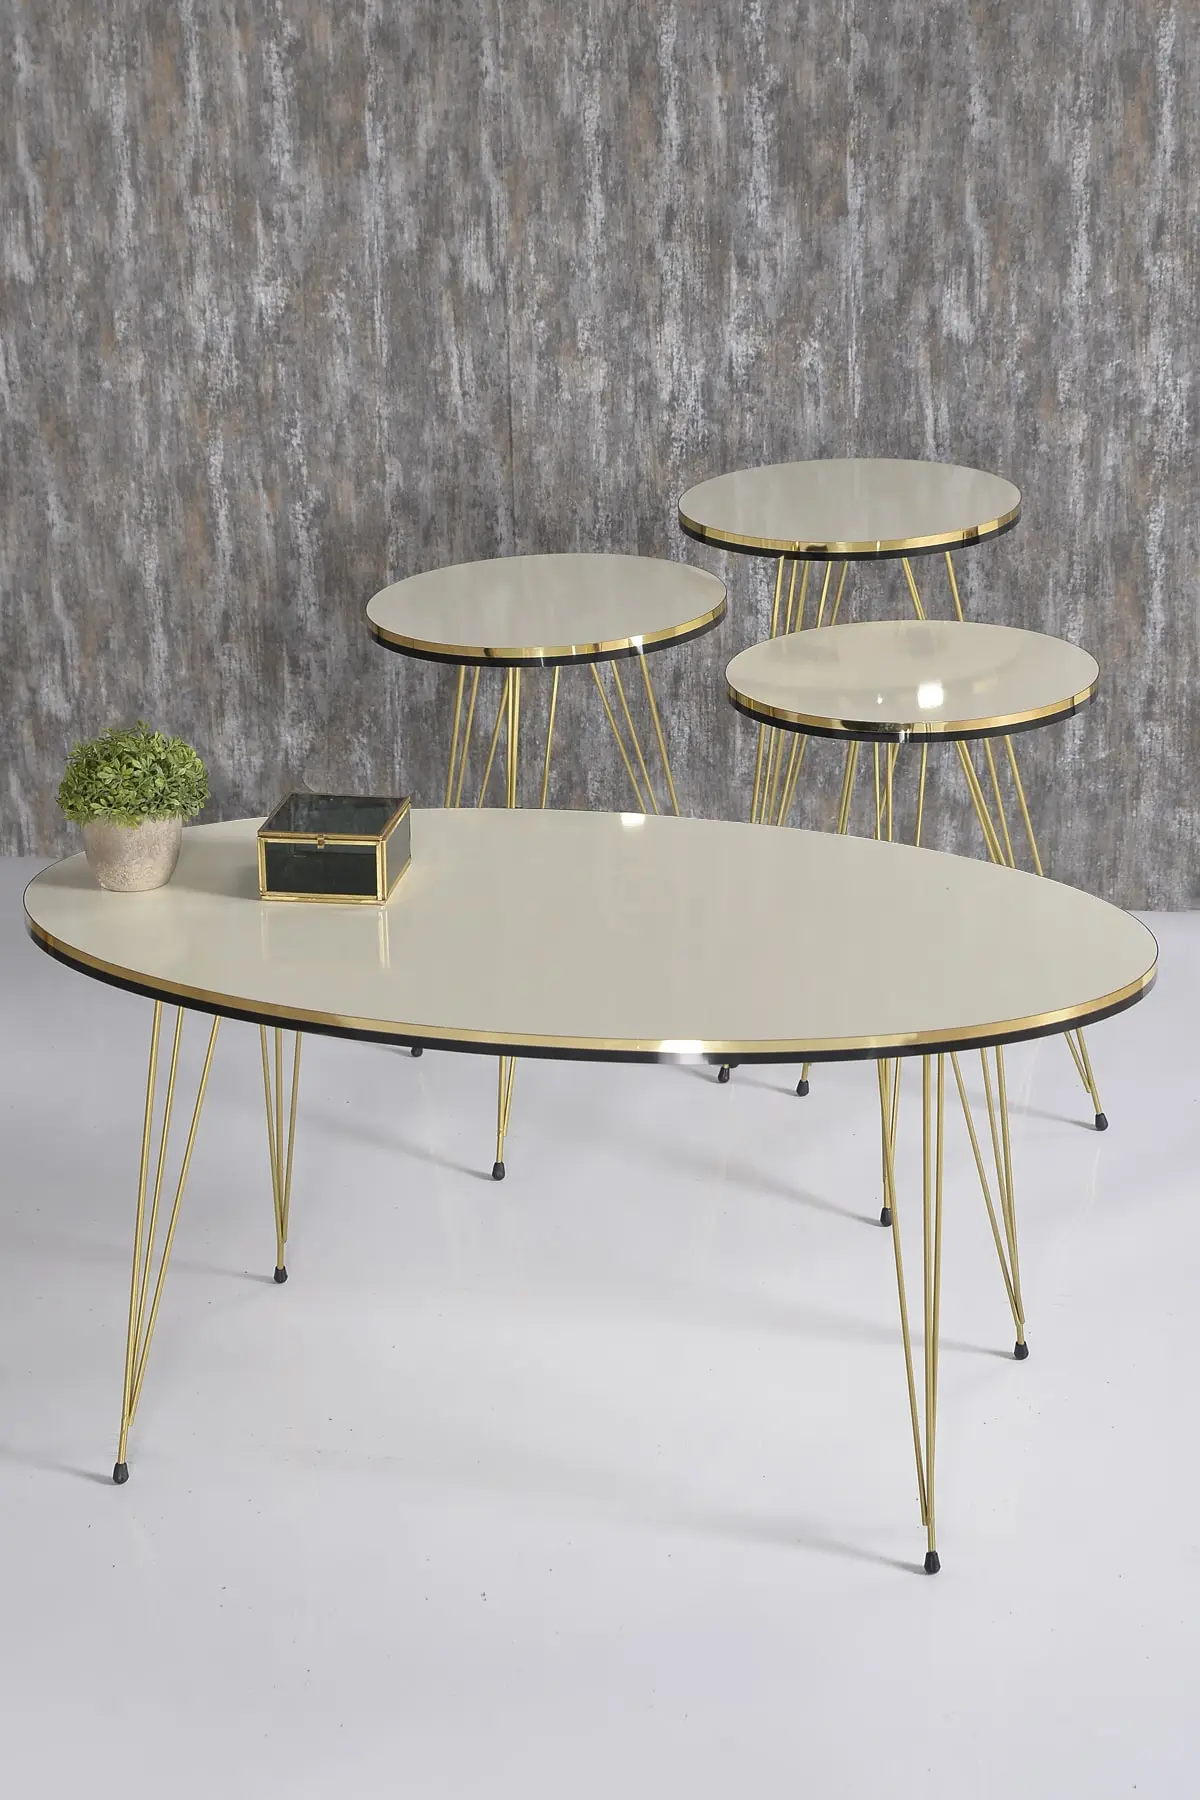 

Zigon Coffee Table And Coffee Table in the Middle Ellipse Set Double Gold Cream Wire Foot Turkiyede.